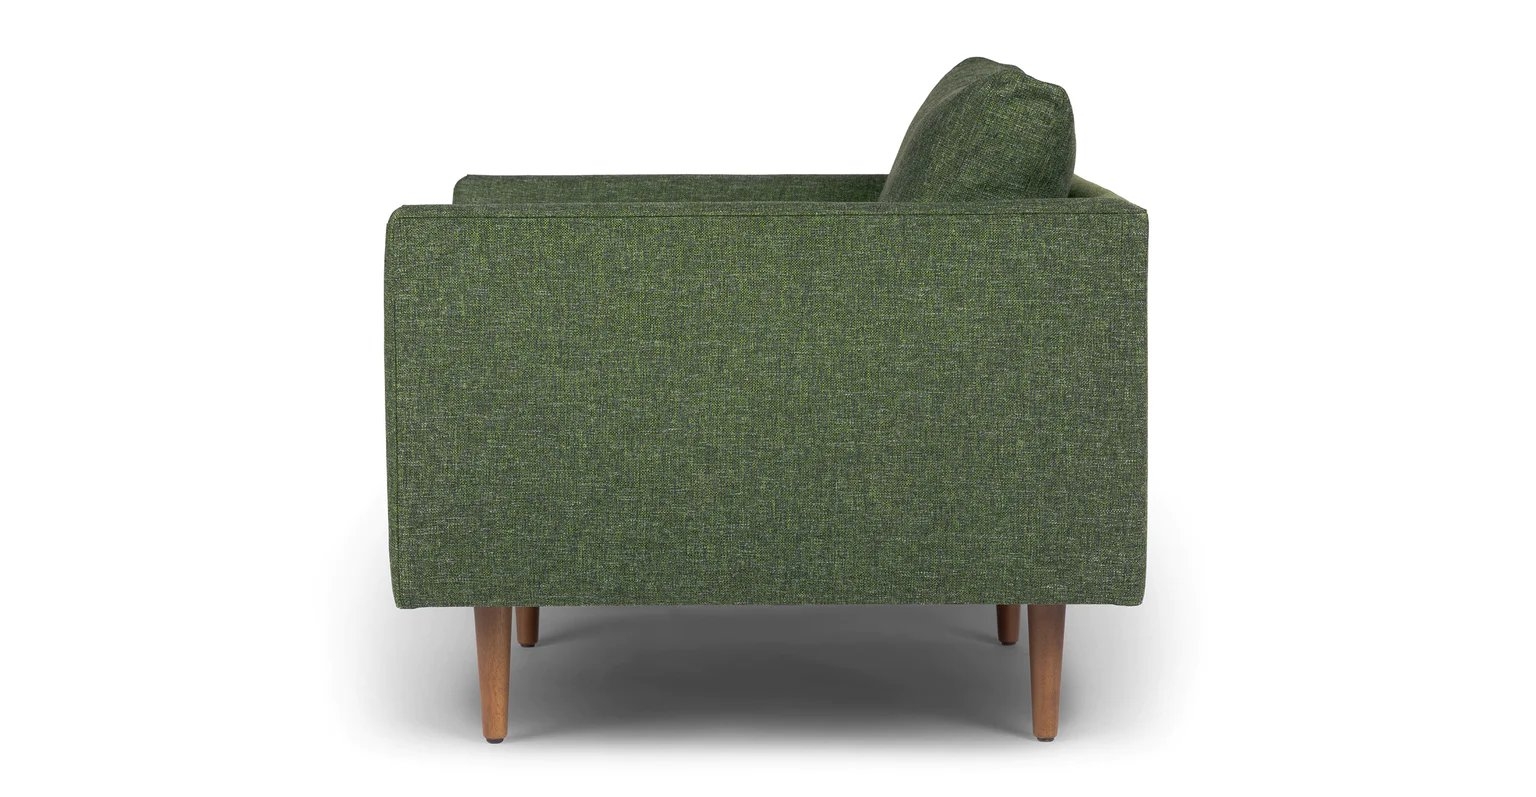 Burrard Forest Green Chair - Image 2